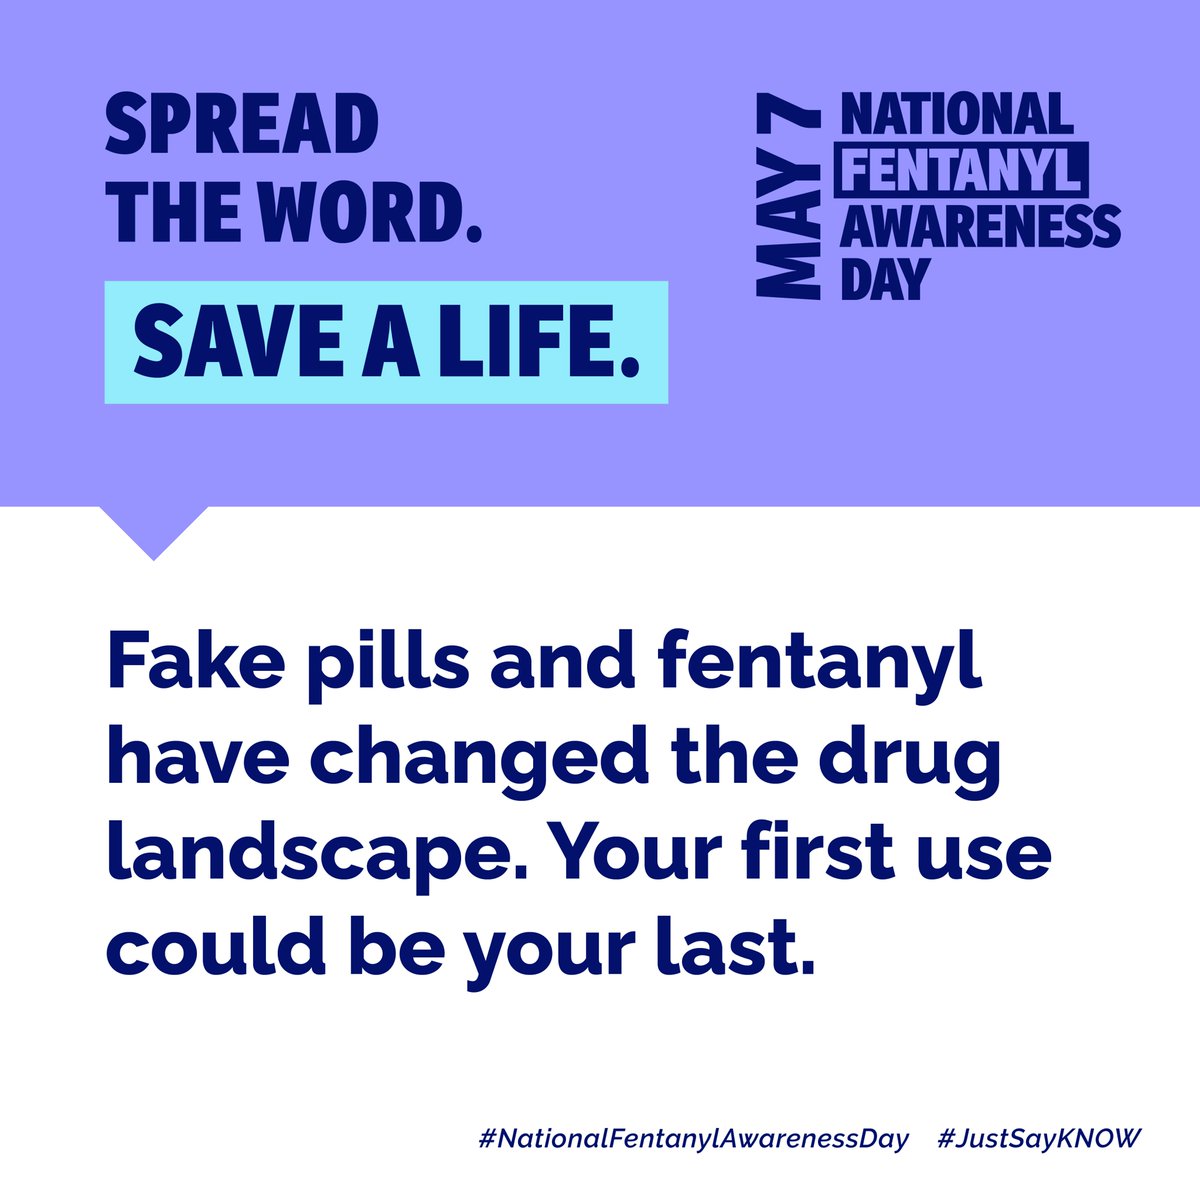 Its #NationalFentanylAwarenessDay.

We work to dismantle drug trafficking rings every day, but we know that arrests & prosecutions aren't enough.

To learn how you can do your part to stem the tide of deadly fentanyl overdoses, visit dea.gov/onepill. 

#JustSayKNOW